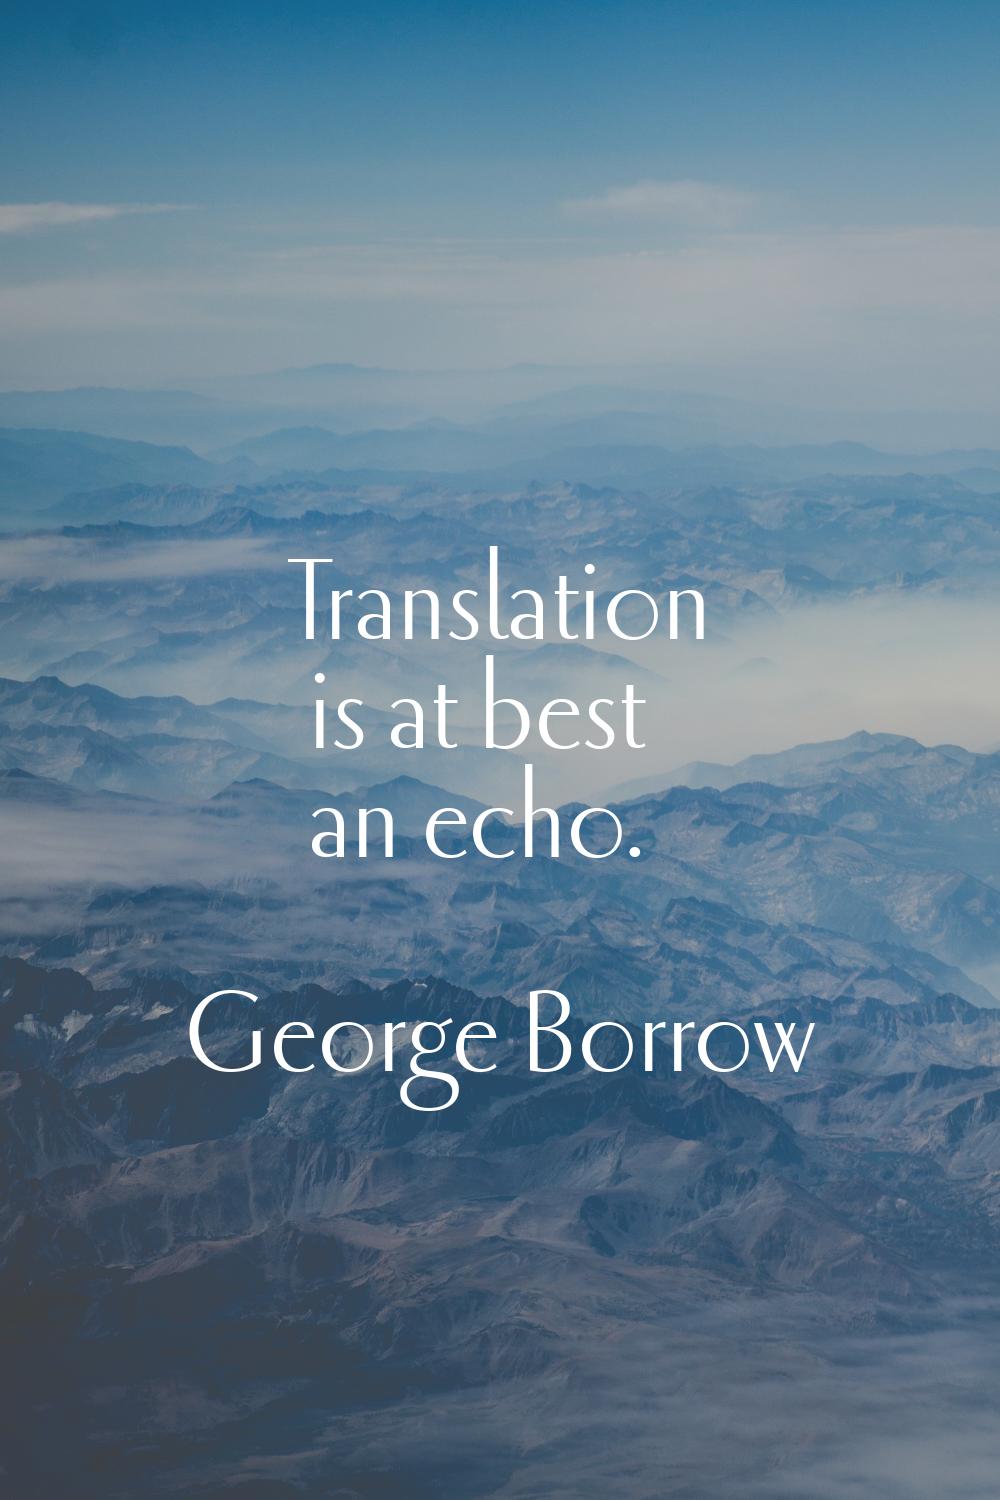 Translation is at best an echo.